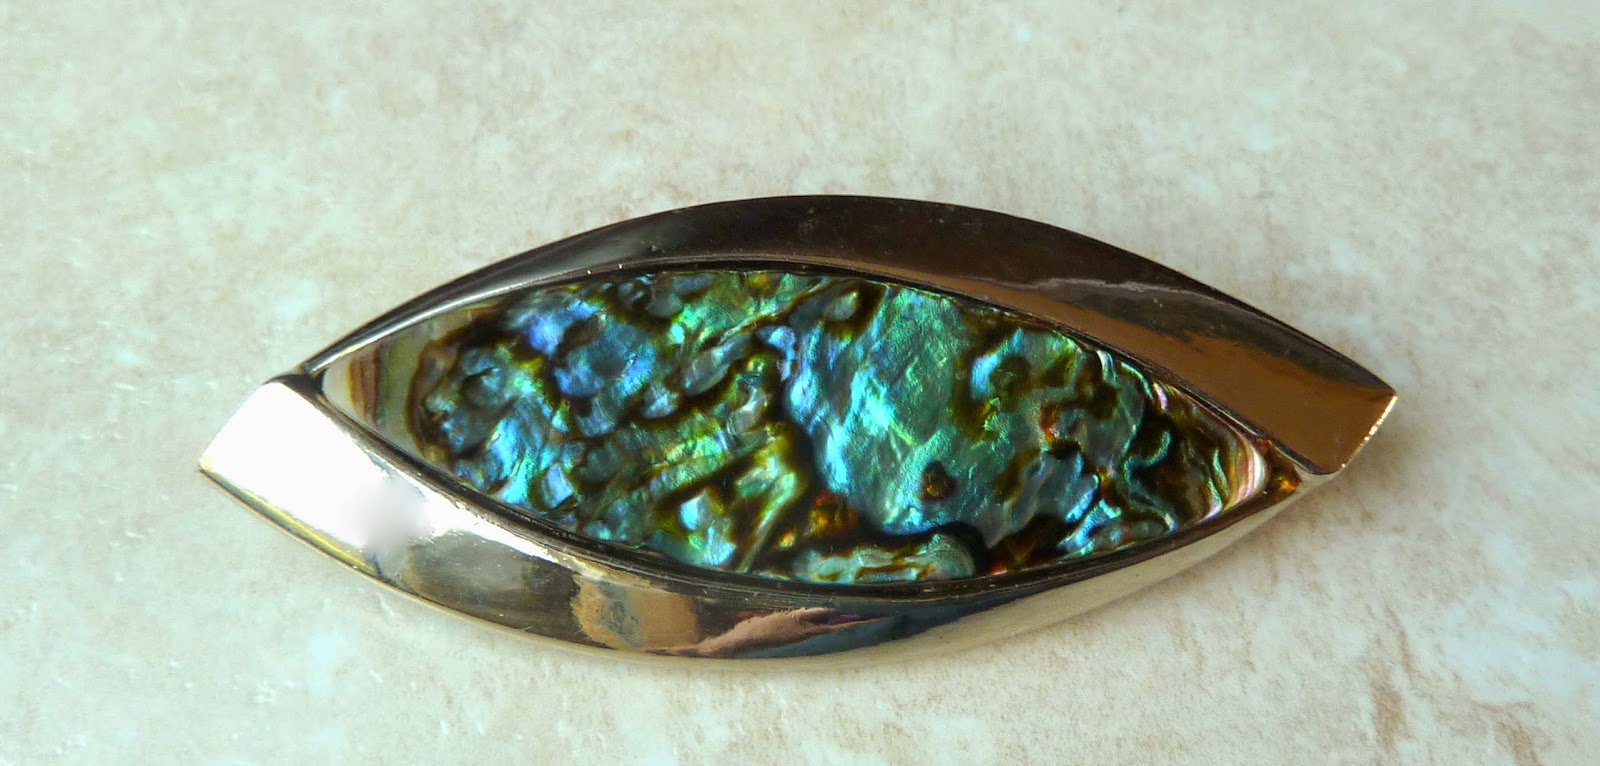 http://www.kcavintagegems.uk/vintage-oval-abalone-shell-brooch-by-exquisite-347-p.asp